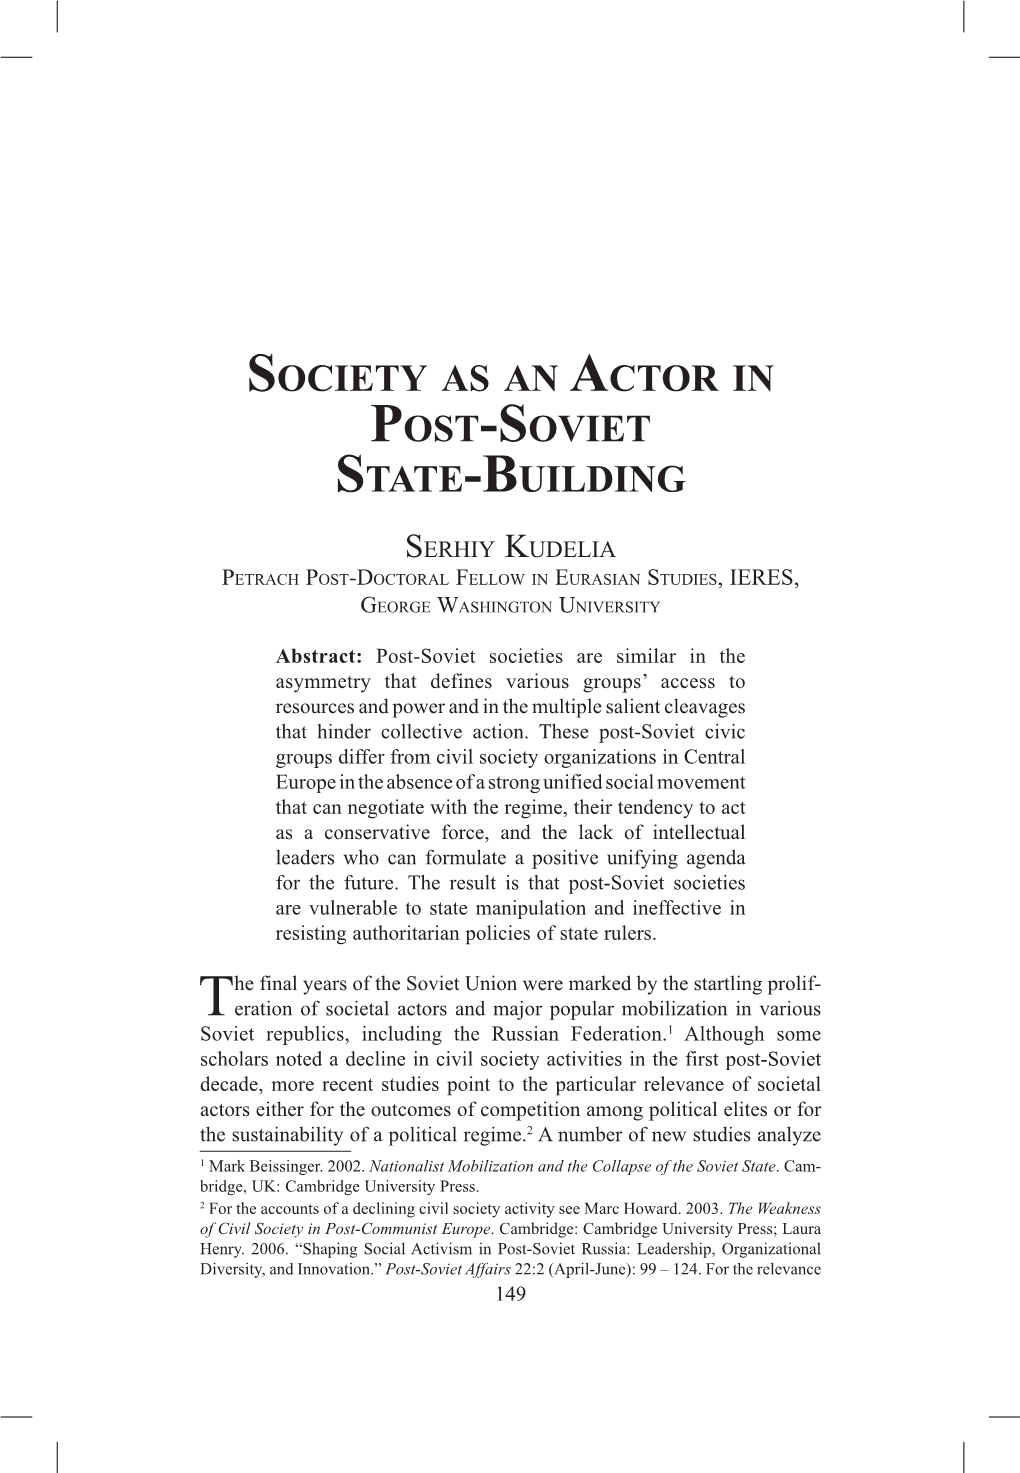 Society As an Actor in Post-Soviet State-Building